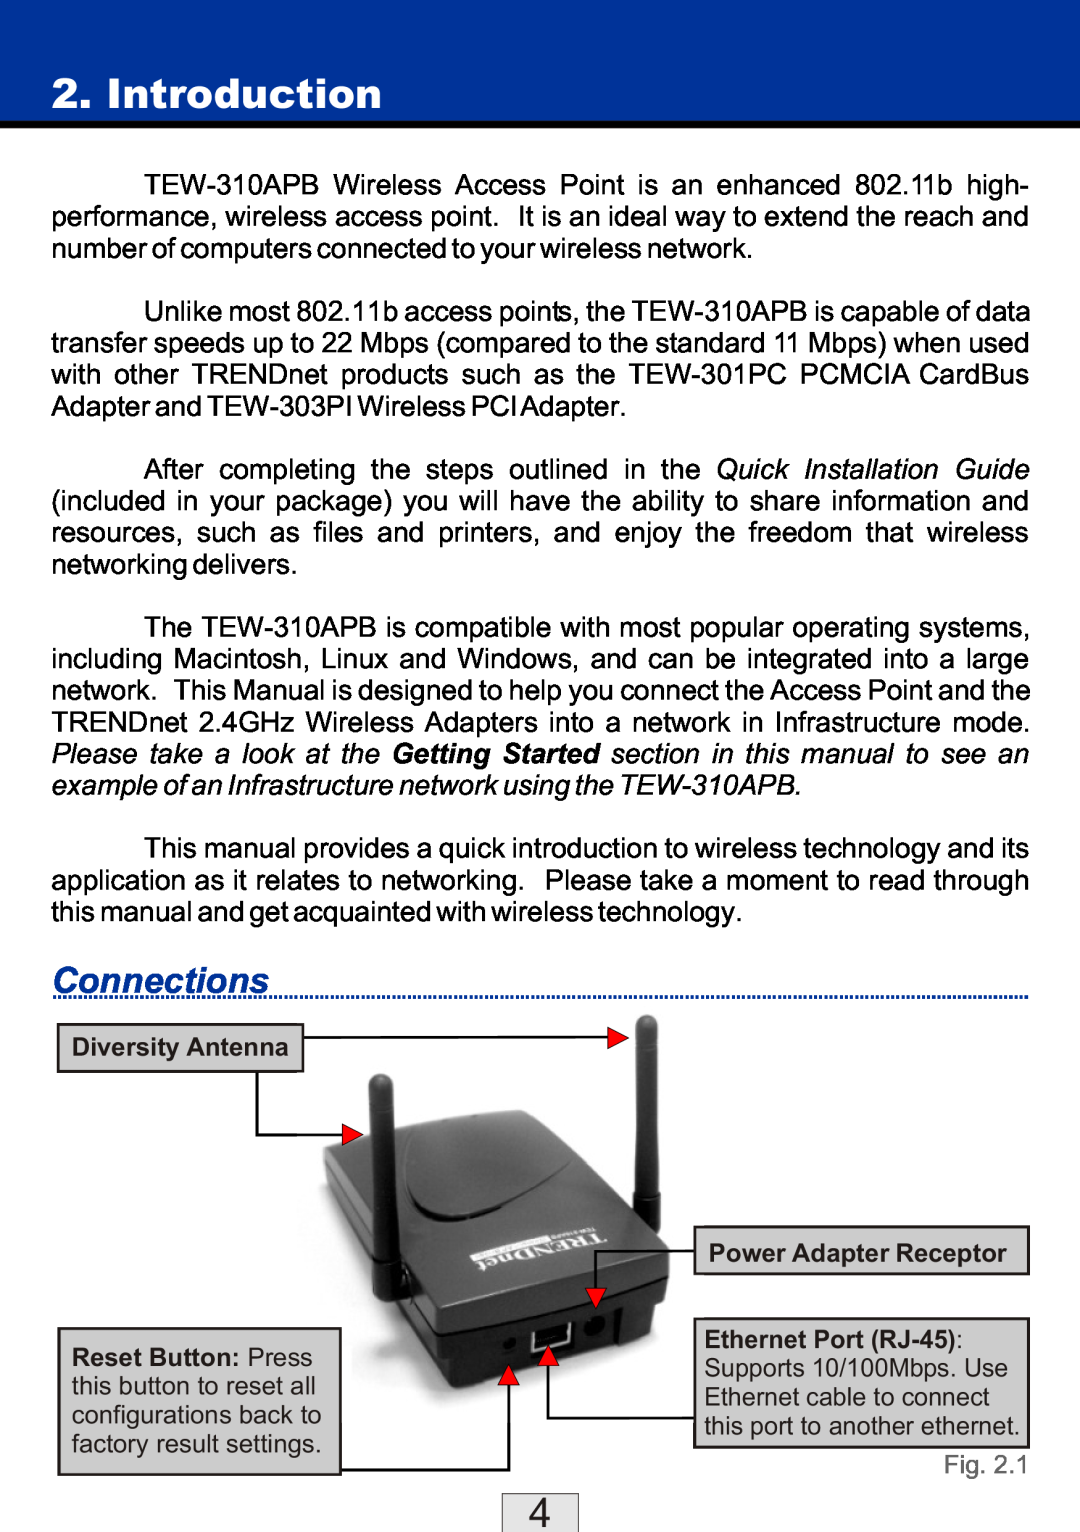 TRENDnet TEW-310APBX manual Introduction, Connections 